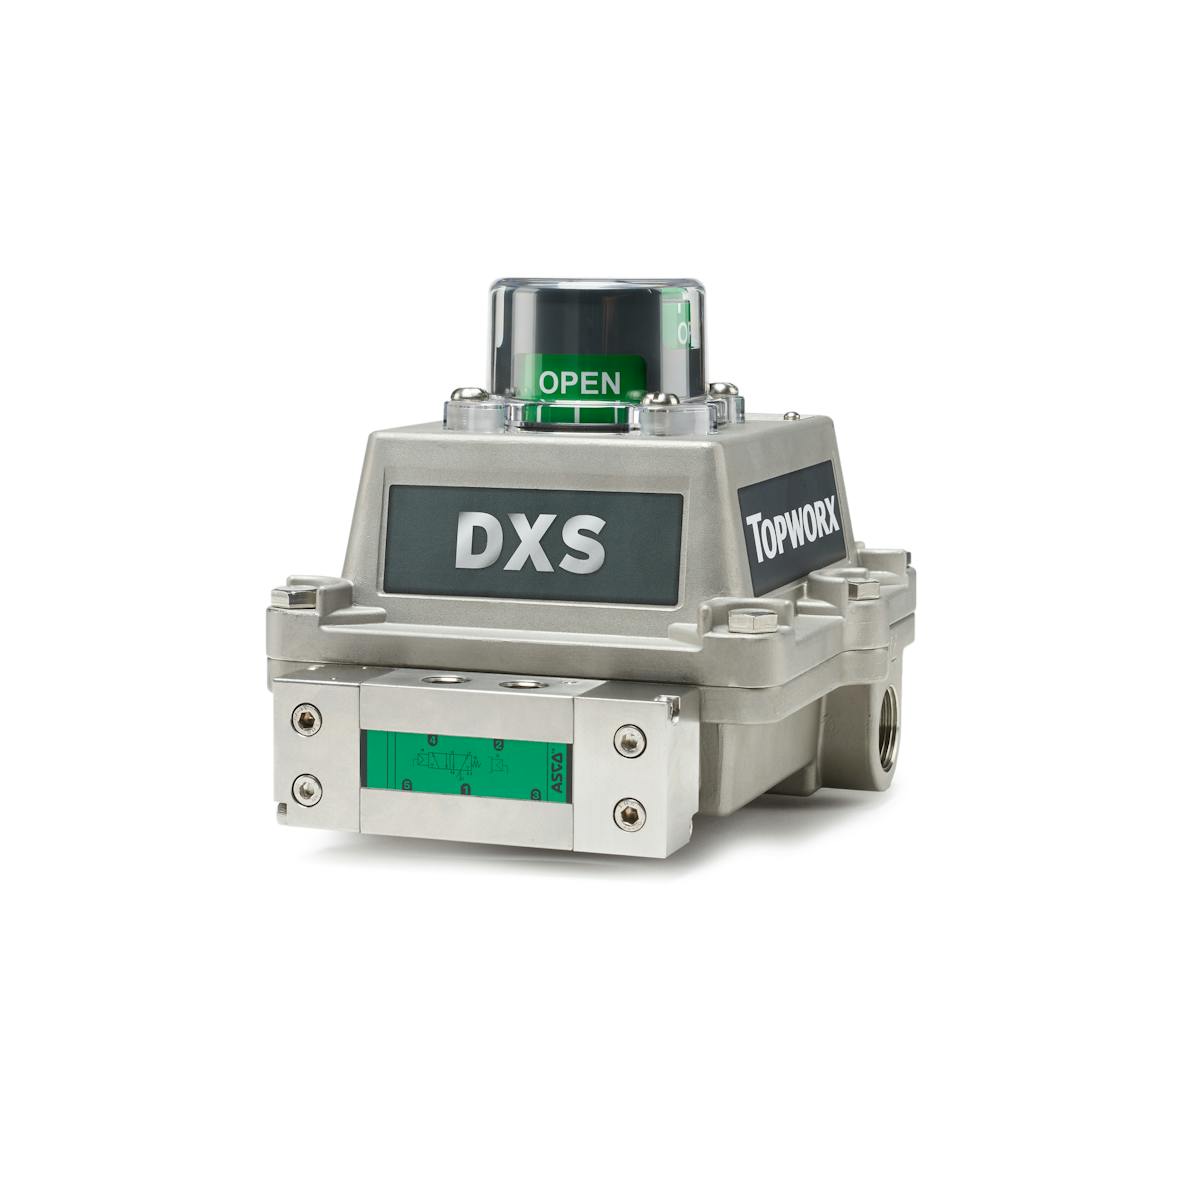 The corrosion resistance and heavy-duty construction of Emerson&rsquo;s TopWorx DX-Series Controllers allows for reliable performance in virtually any plant condition. These discrete valve controllers enable automated on/off valves to communicate via a wide range of protocols and carry a variety of hazardous area certifications.